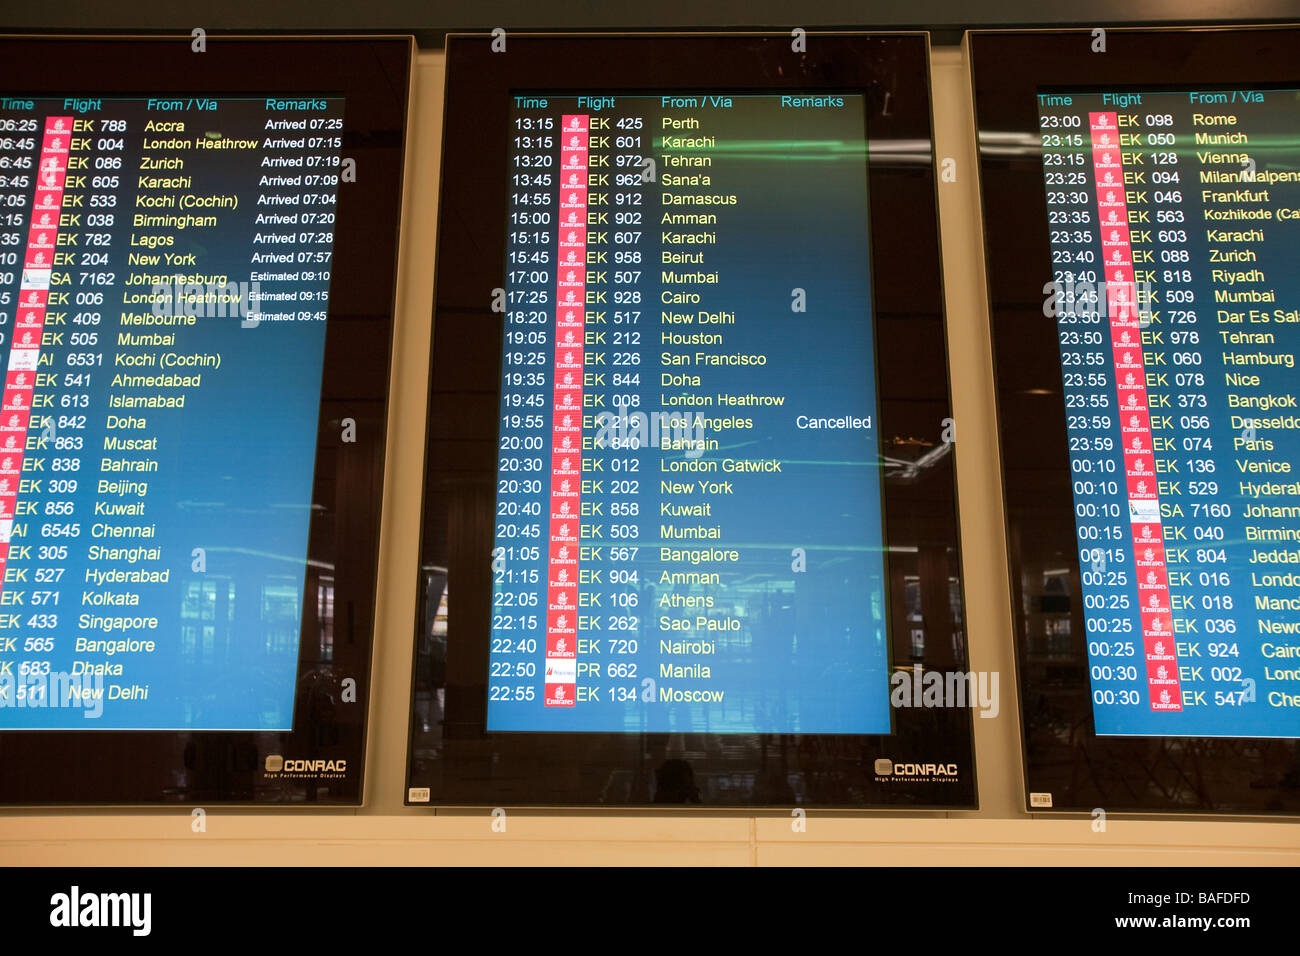 times of flights in Dubai airport Stock Photo